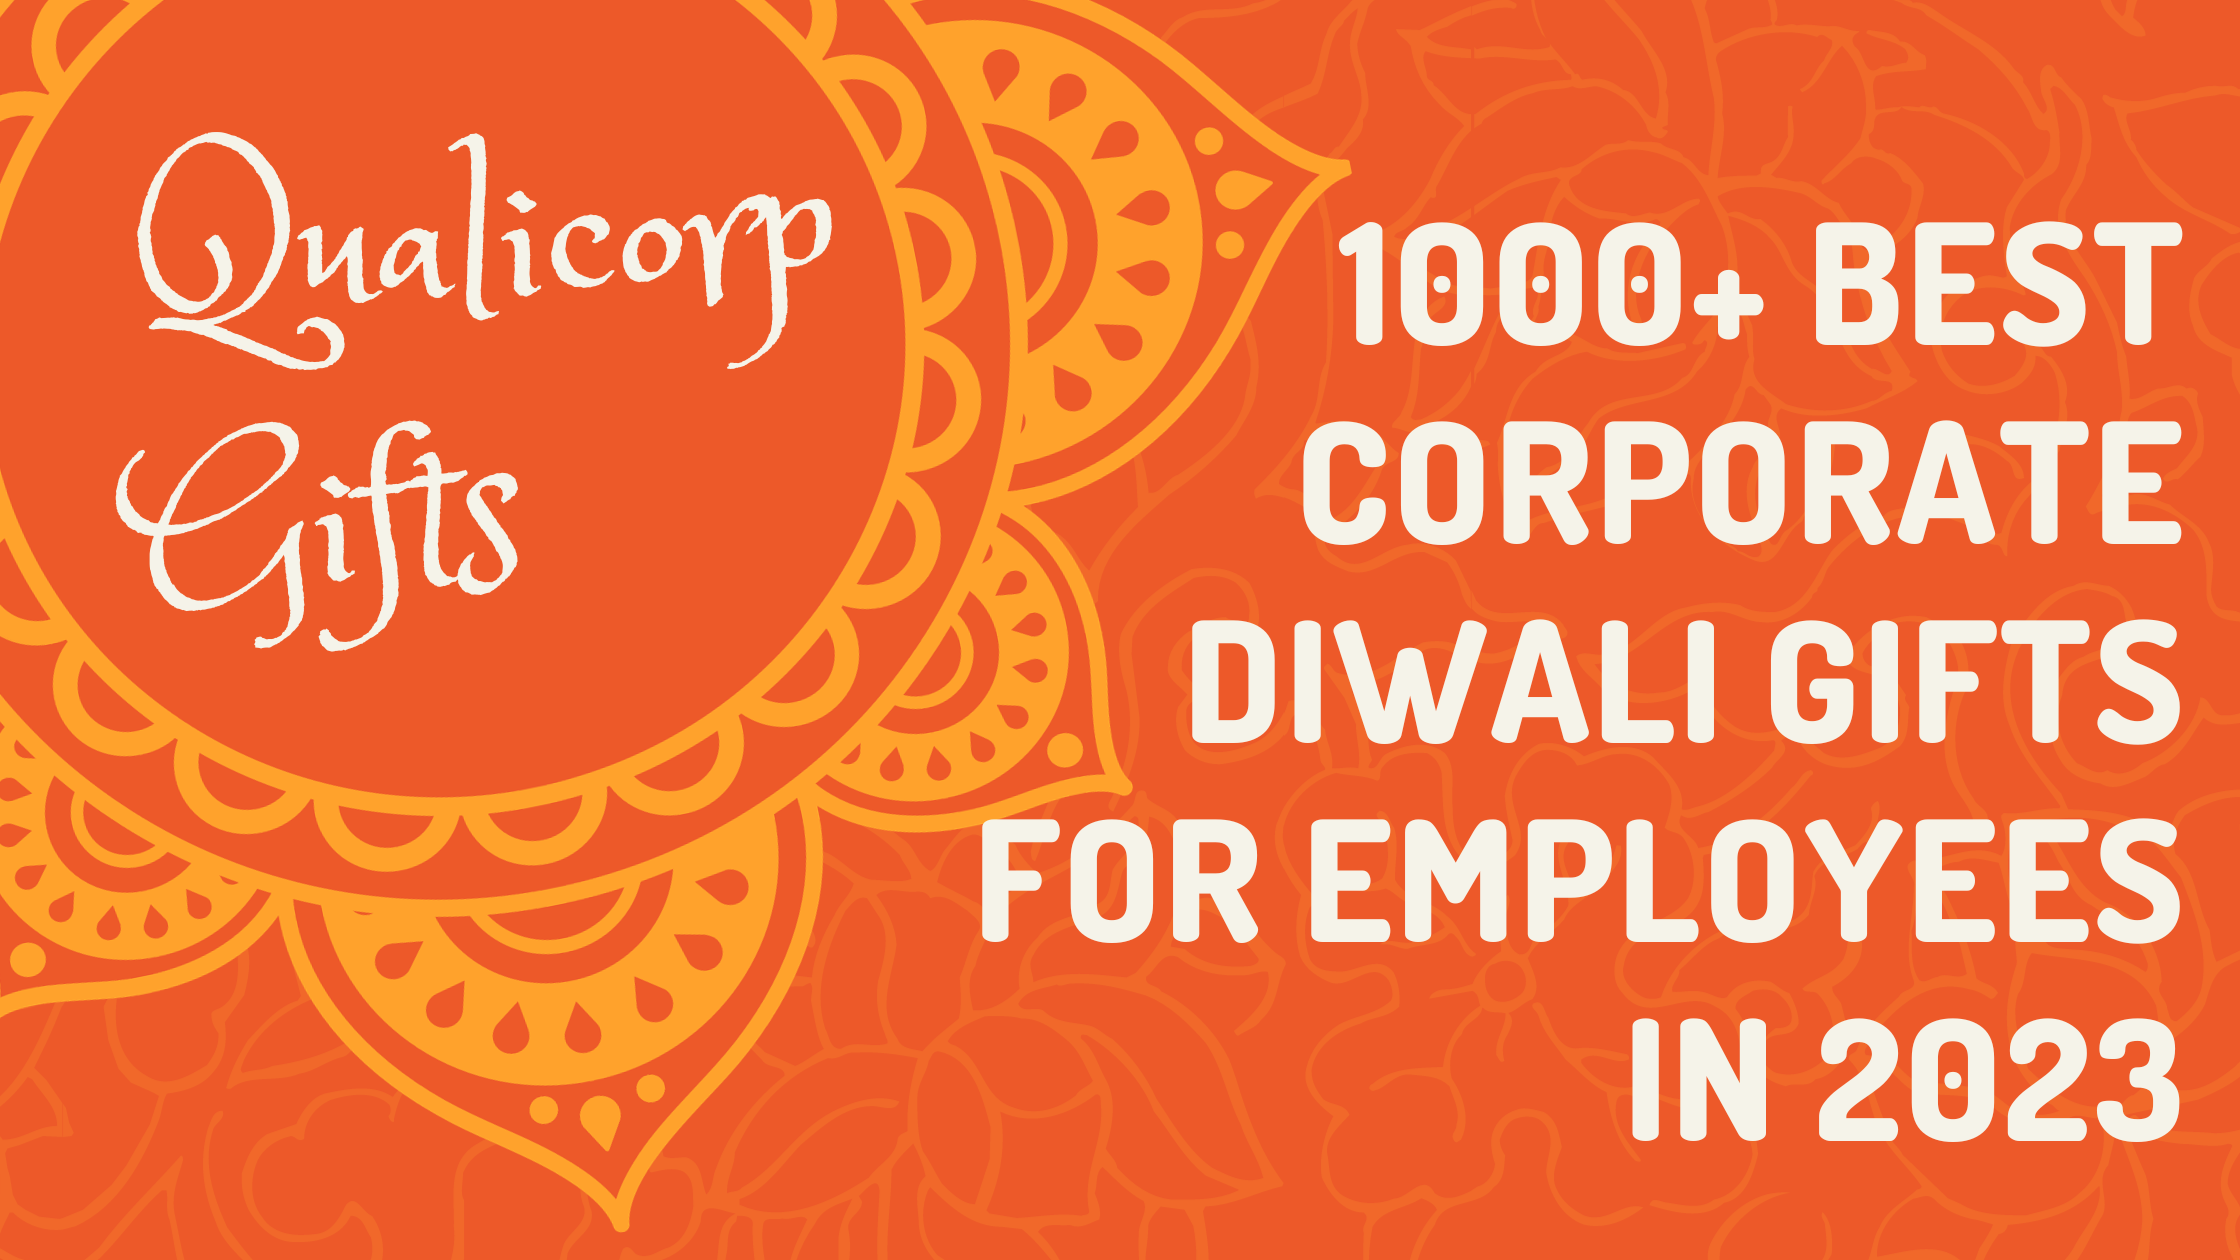 1000+ Best Corporate Diwali Gifts for Employees in 2023